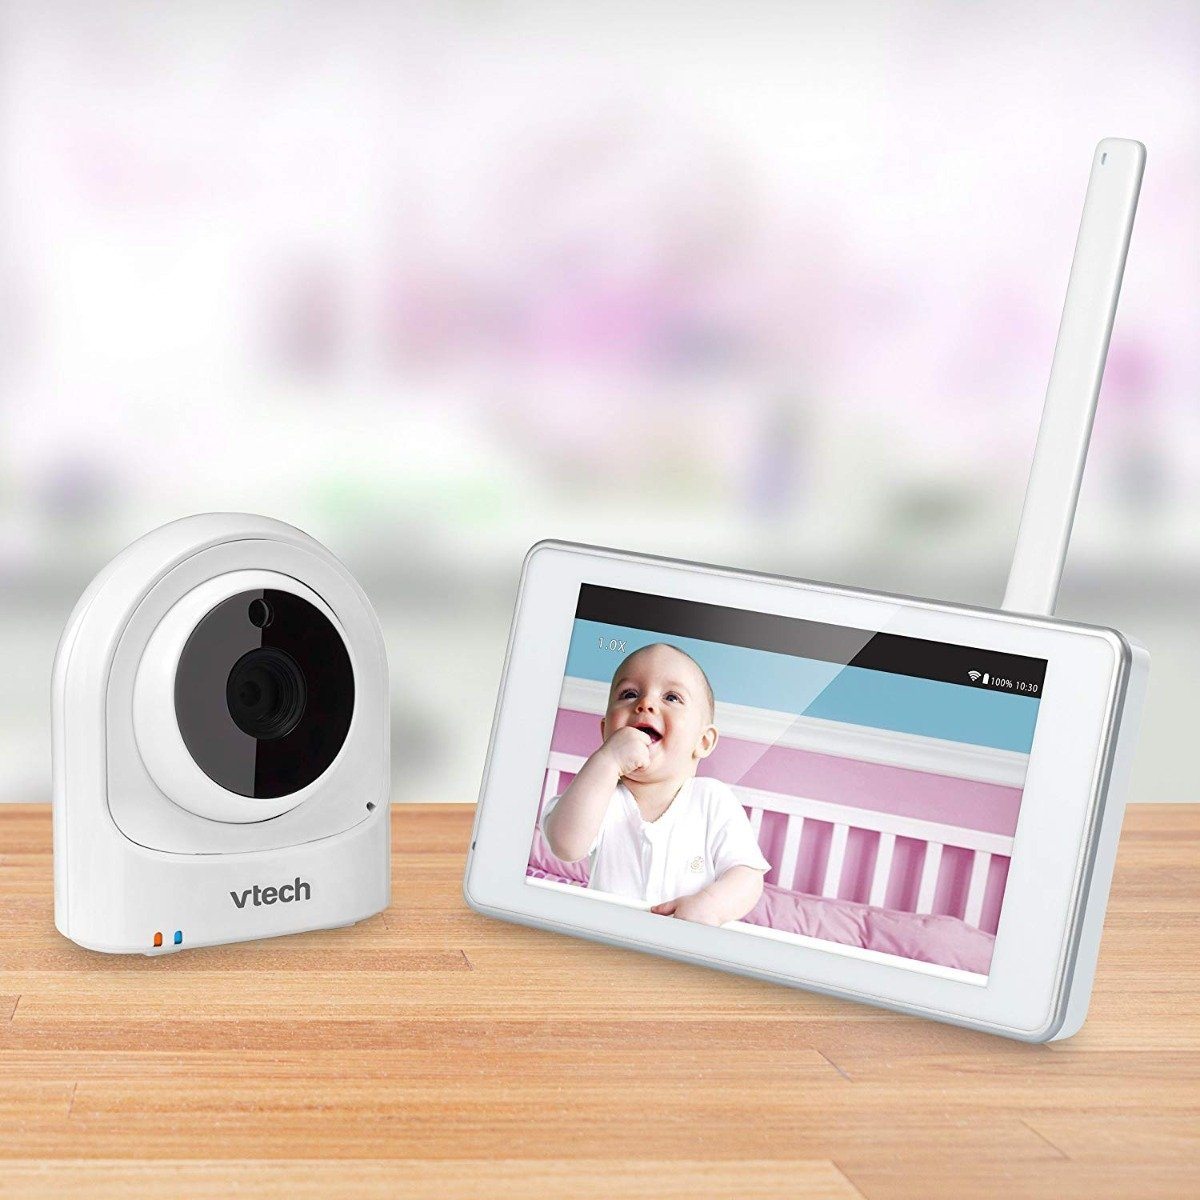 VTech Wi-Fi Enabled Expandable Digital Video Baby Monitor